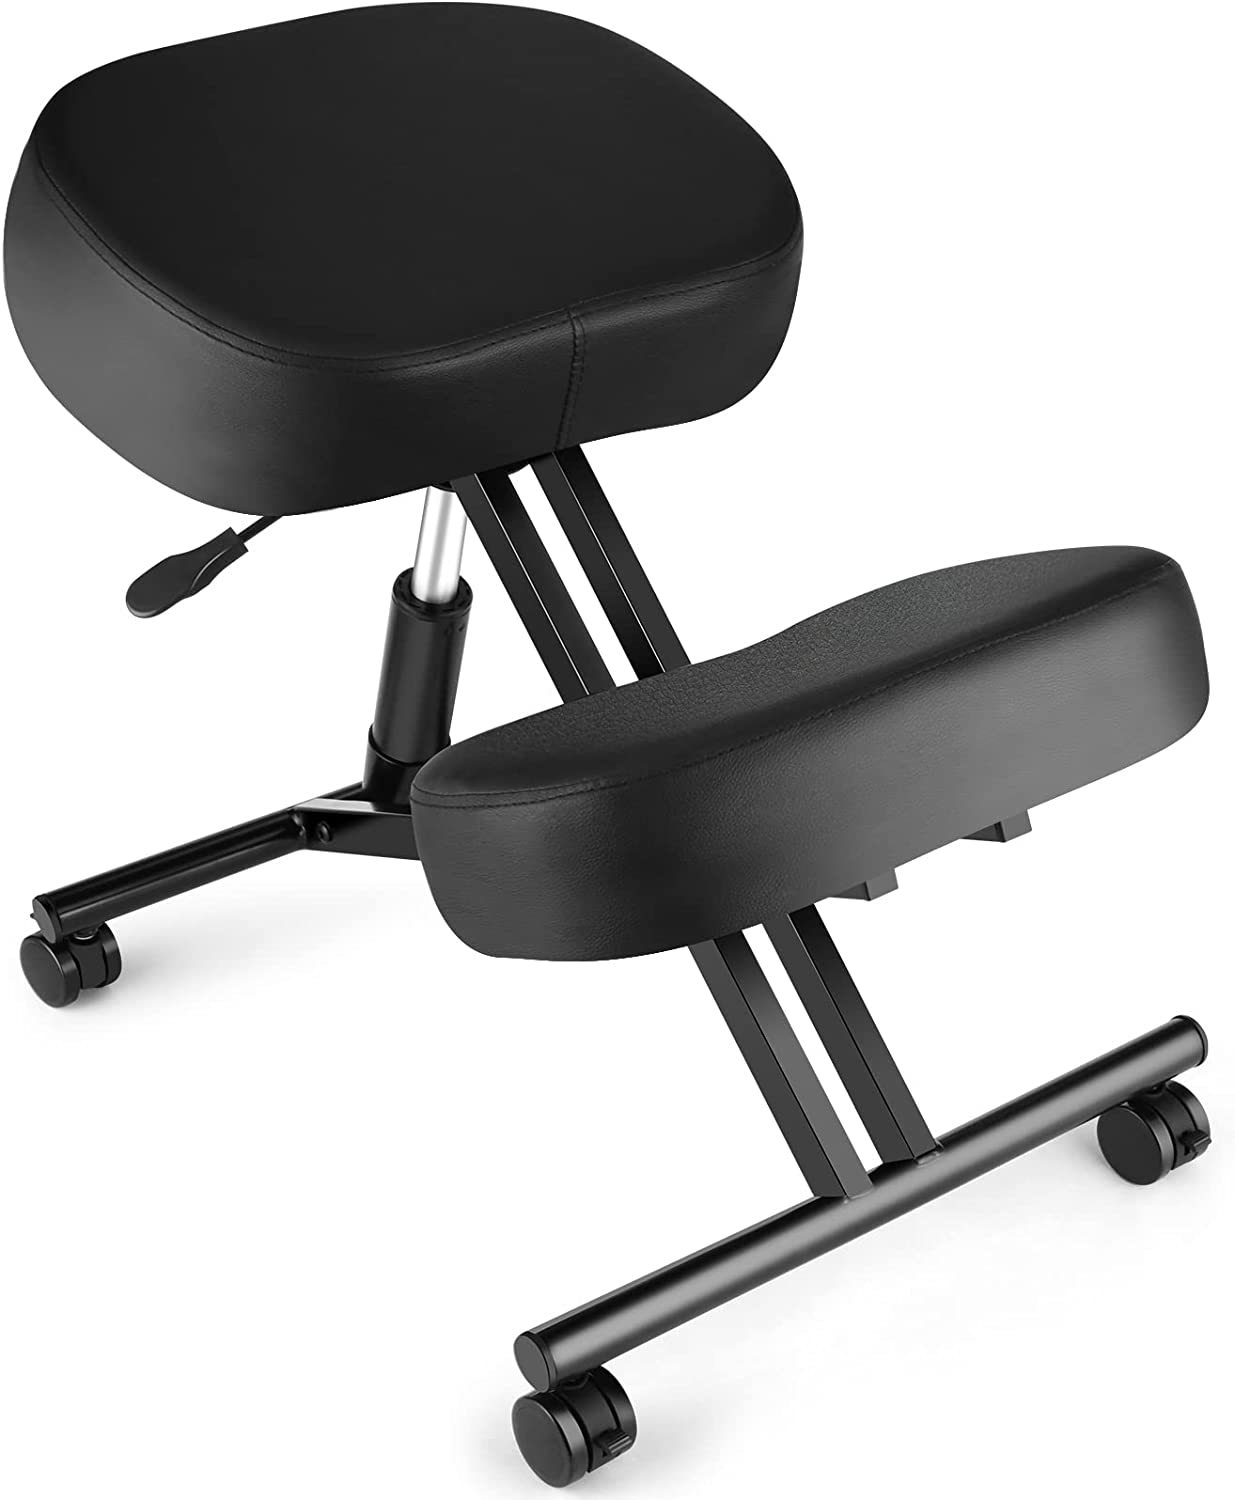 Primary image for Himimi Ergonomic Kneeling Chair For The Office, Height-Adjustable Stool With